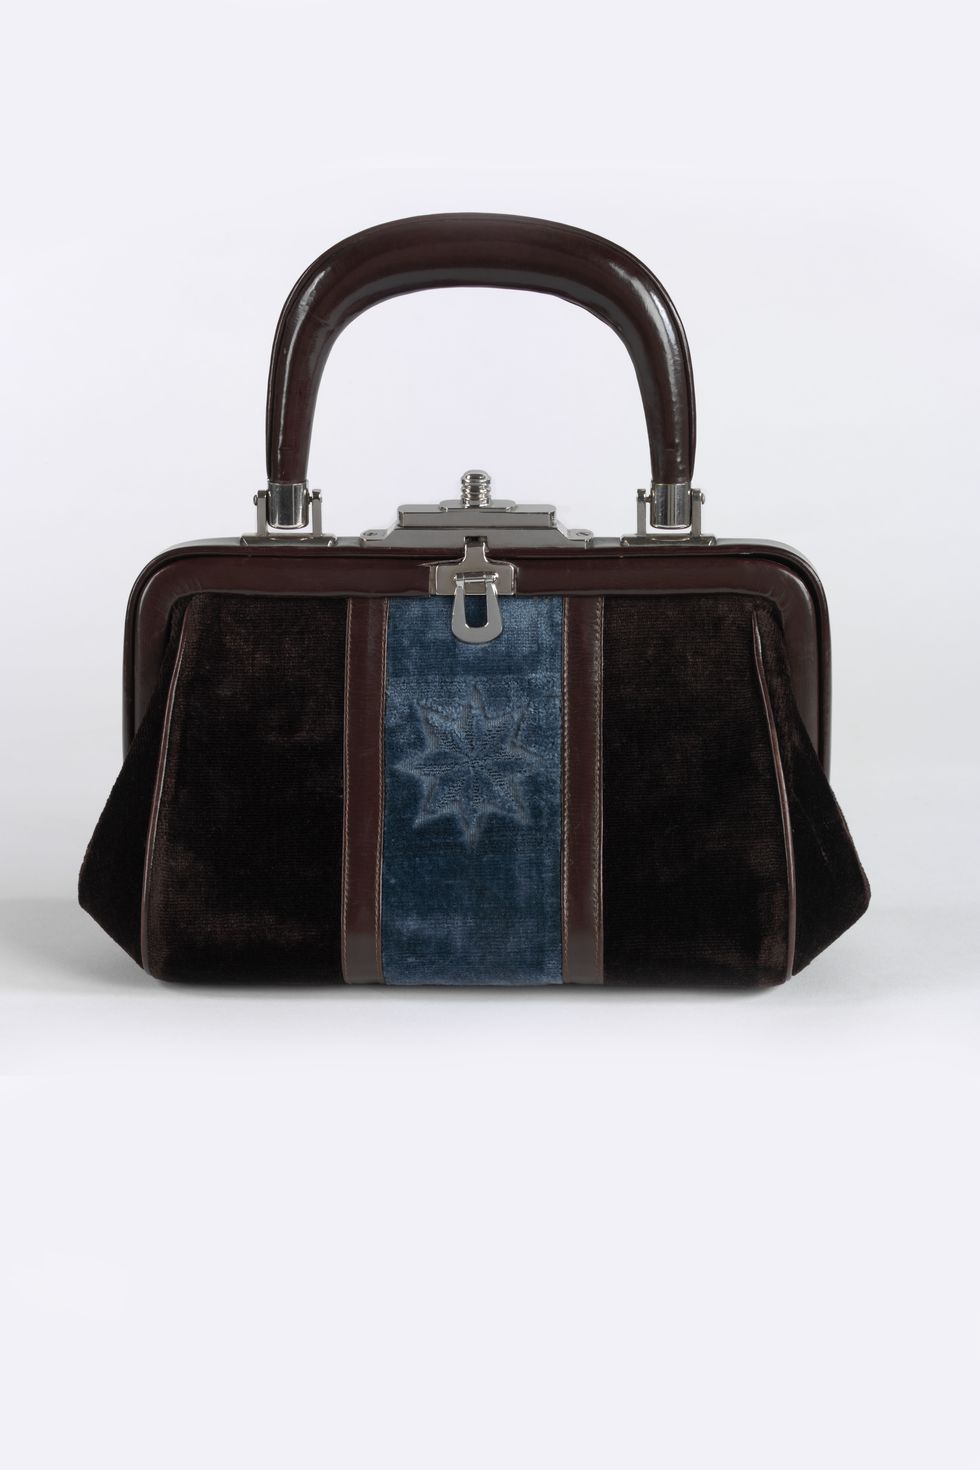 Louis Vuitton. Travelling with Style - Victoria & Albert Museum